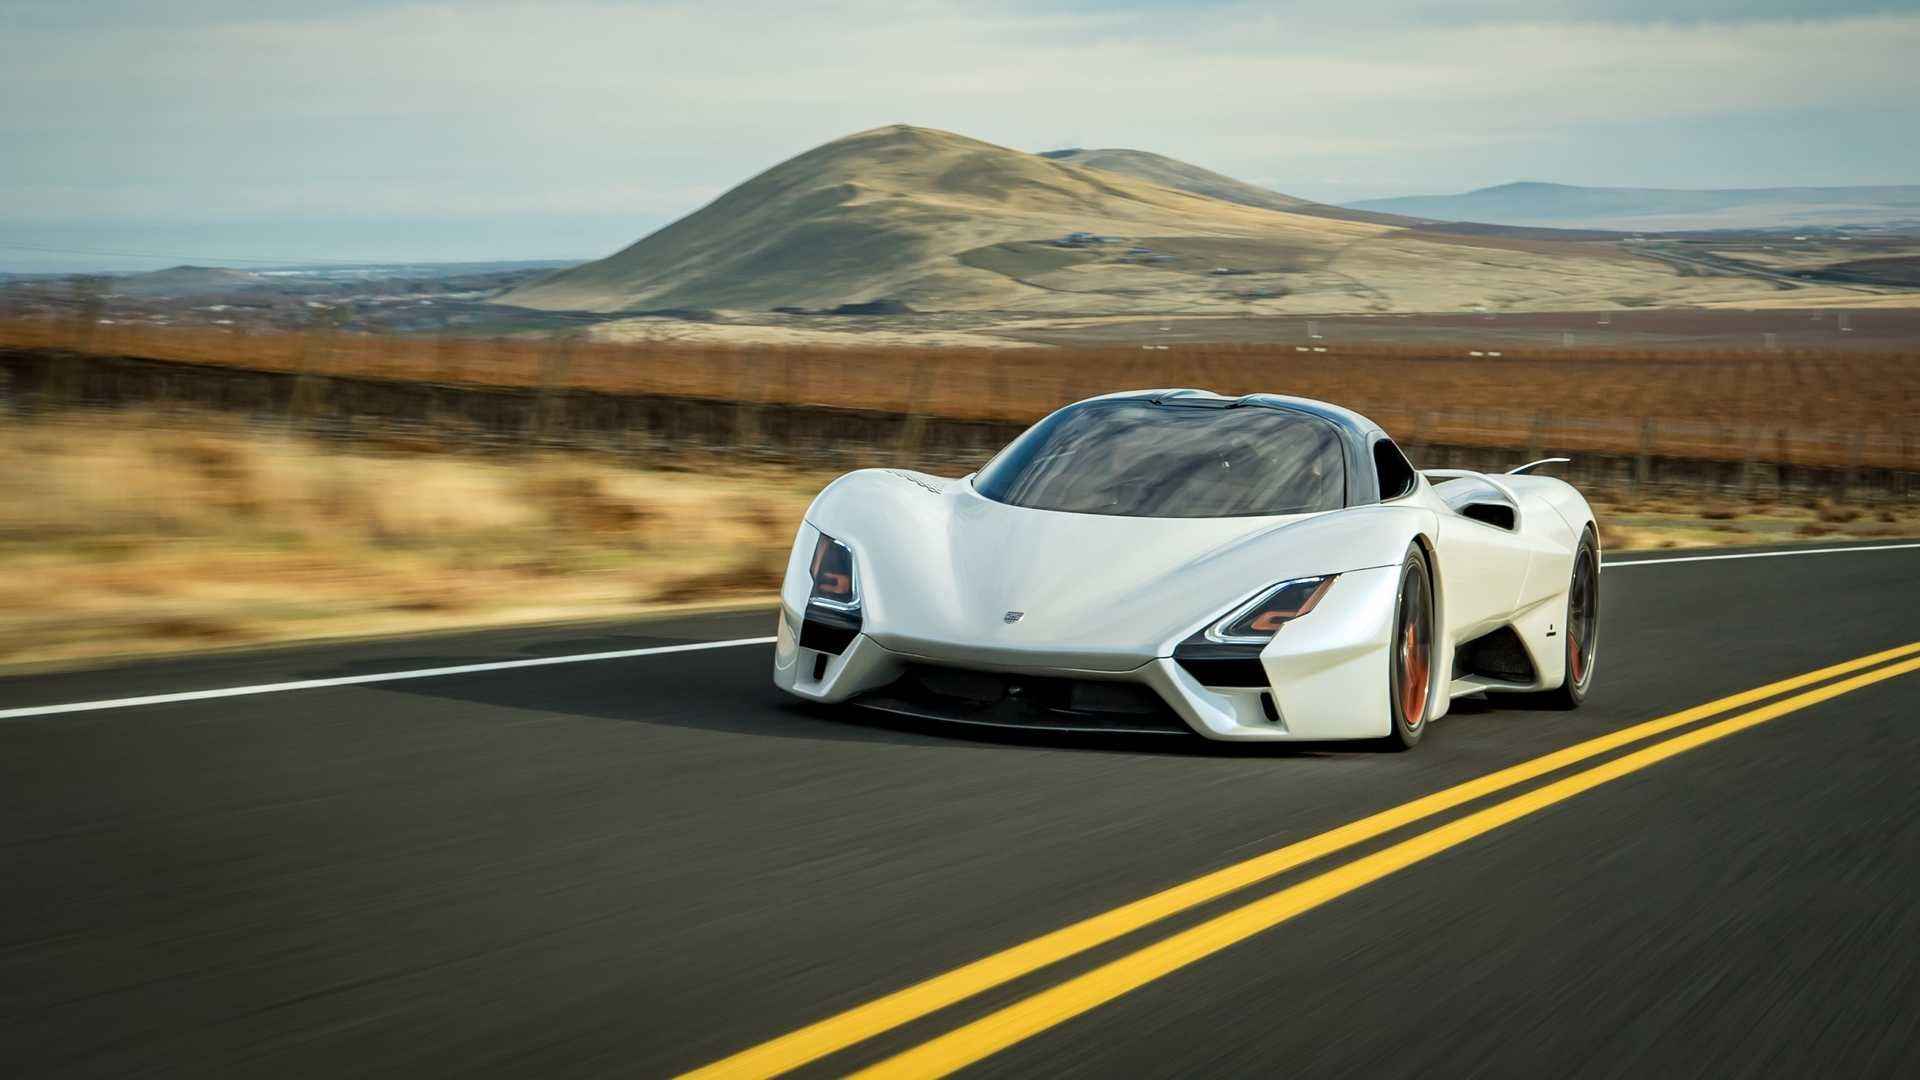 The new SSC Tuatara is a speed monster.